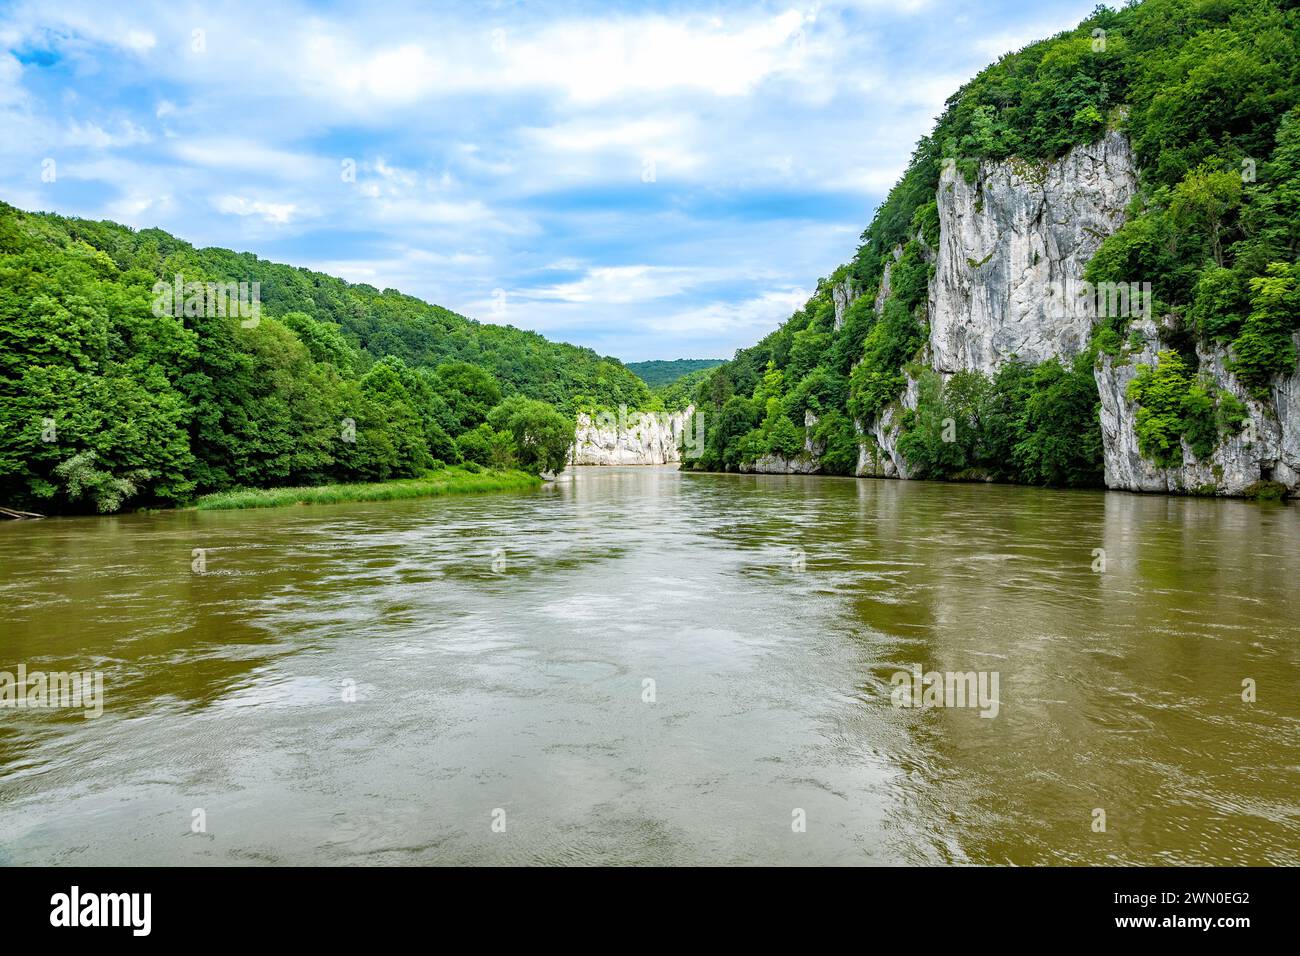 Danube Gorge, Donaudurchbruch, Weltenburg, Germany, Europe. Danube Gorge lies on the Lower Bavarian section of the River Danube between the town of Ke Stock Photo